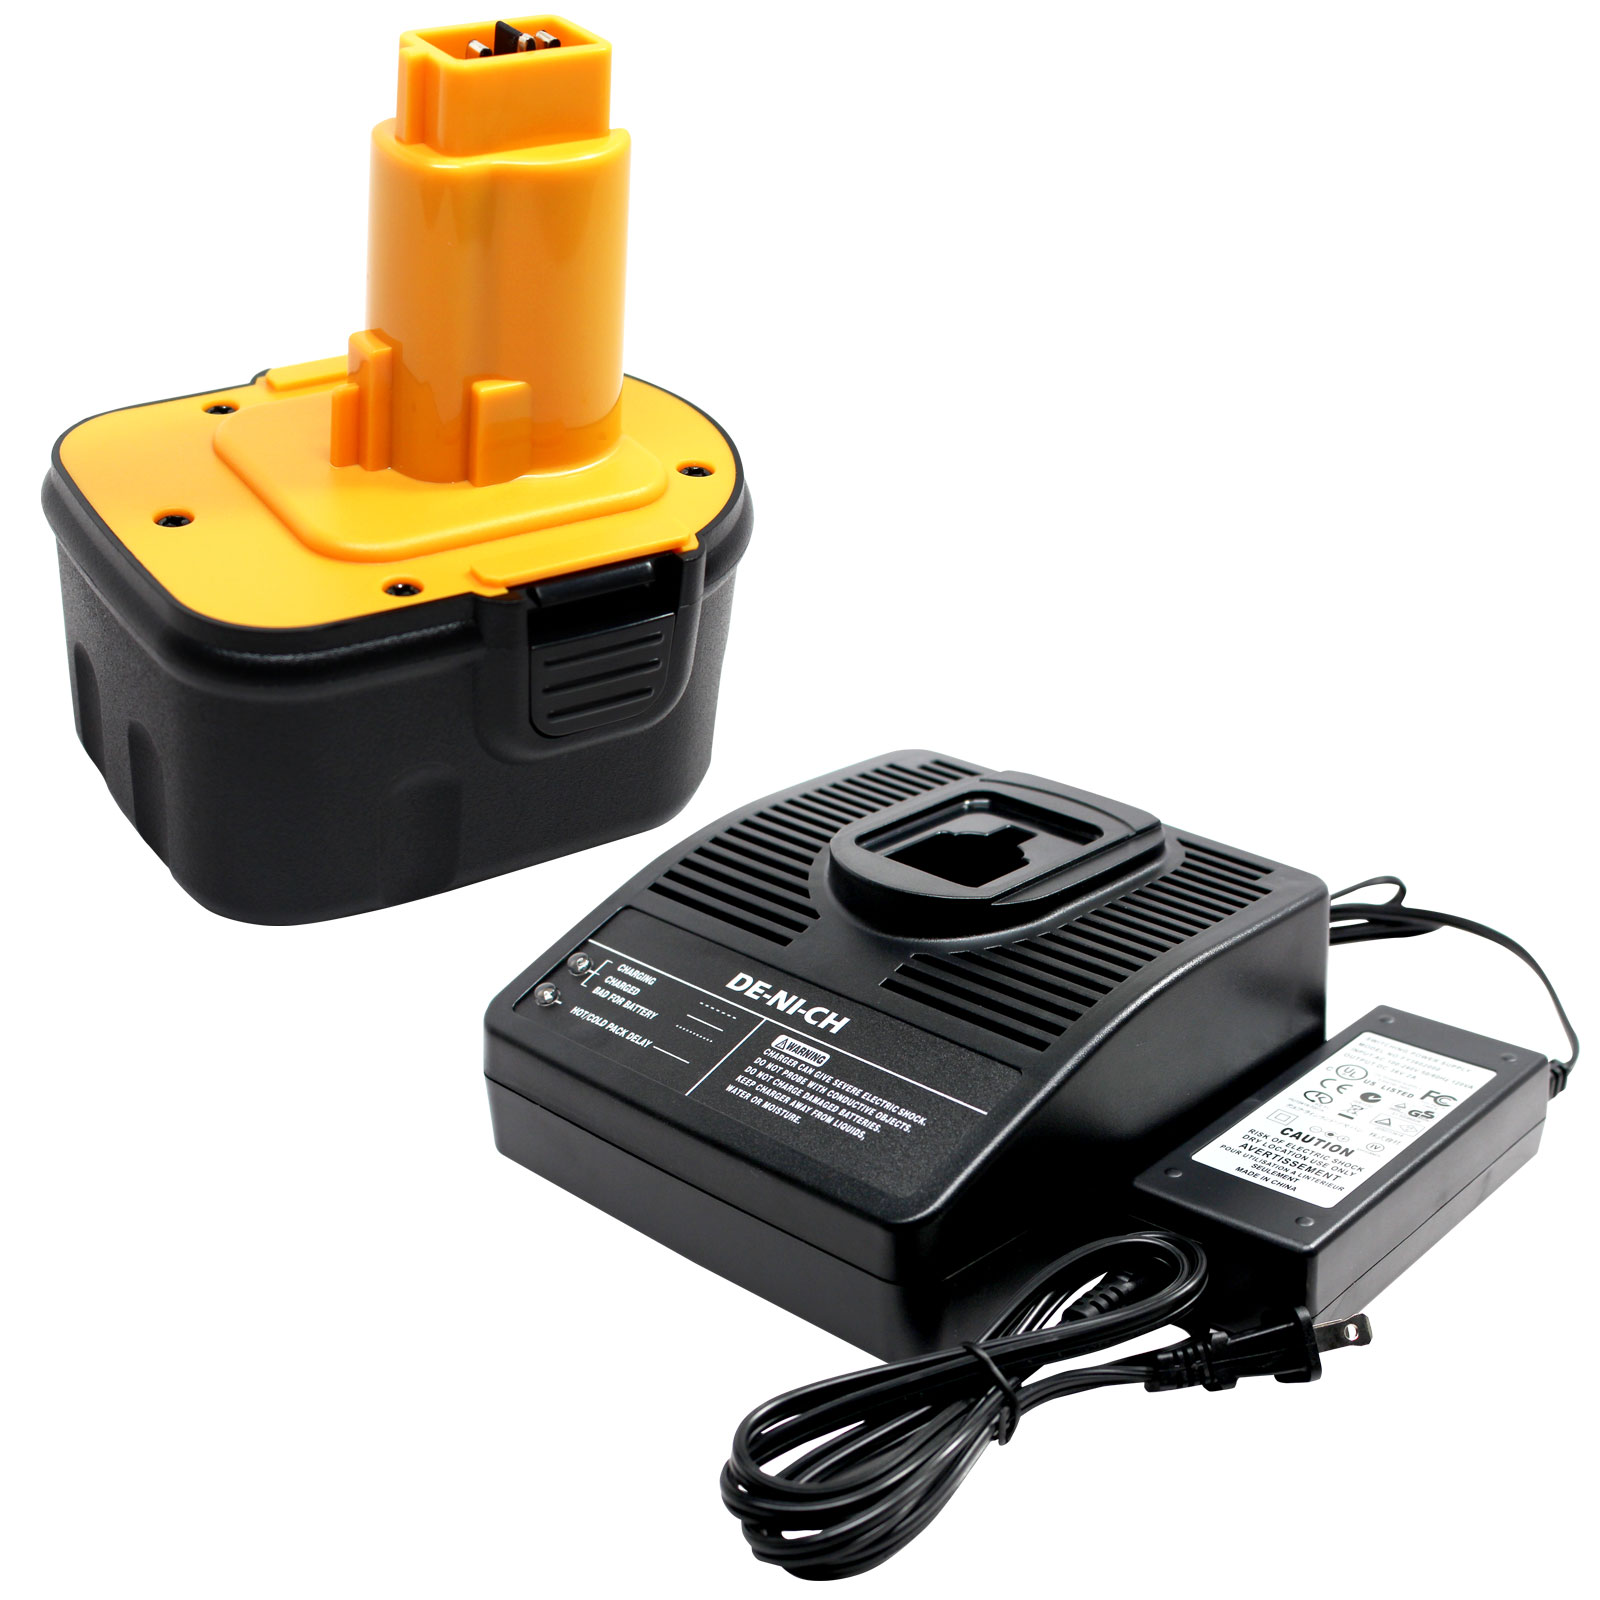 Pay tribute advantage Pornography UpStart Battery 2-Pack DeWalt DW9072 Battery + Universal Charger for Dewalt  - Replacement DeWalt 12V Battery and Charger (1300mAh, NICD)